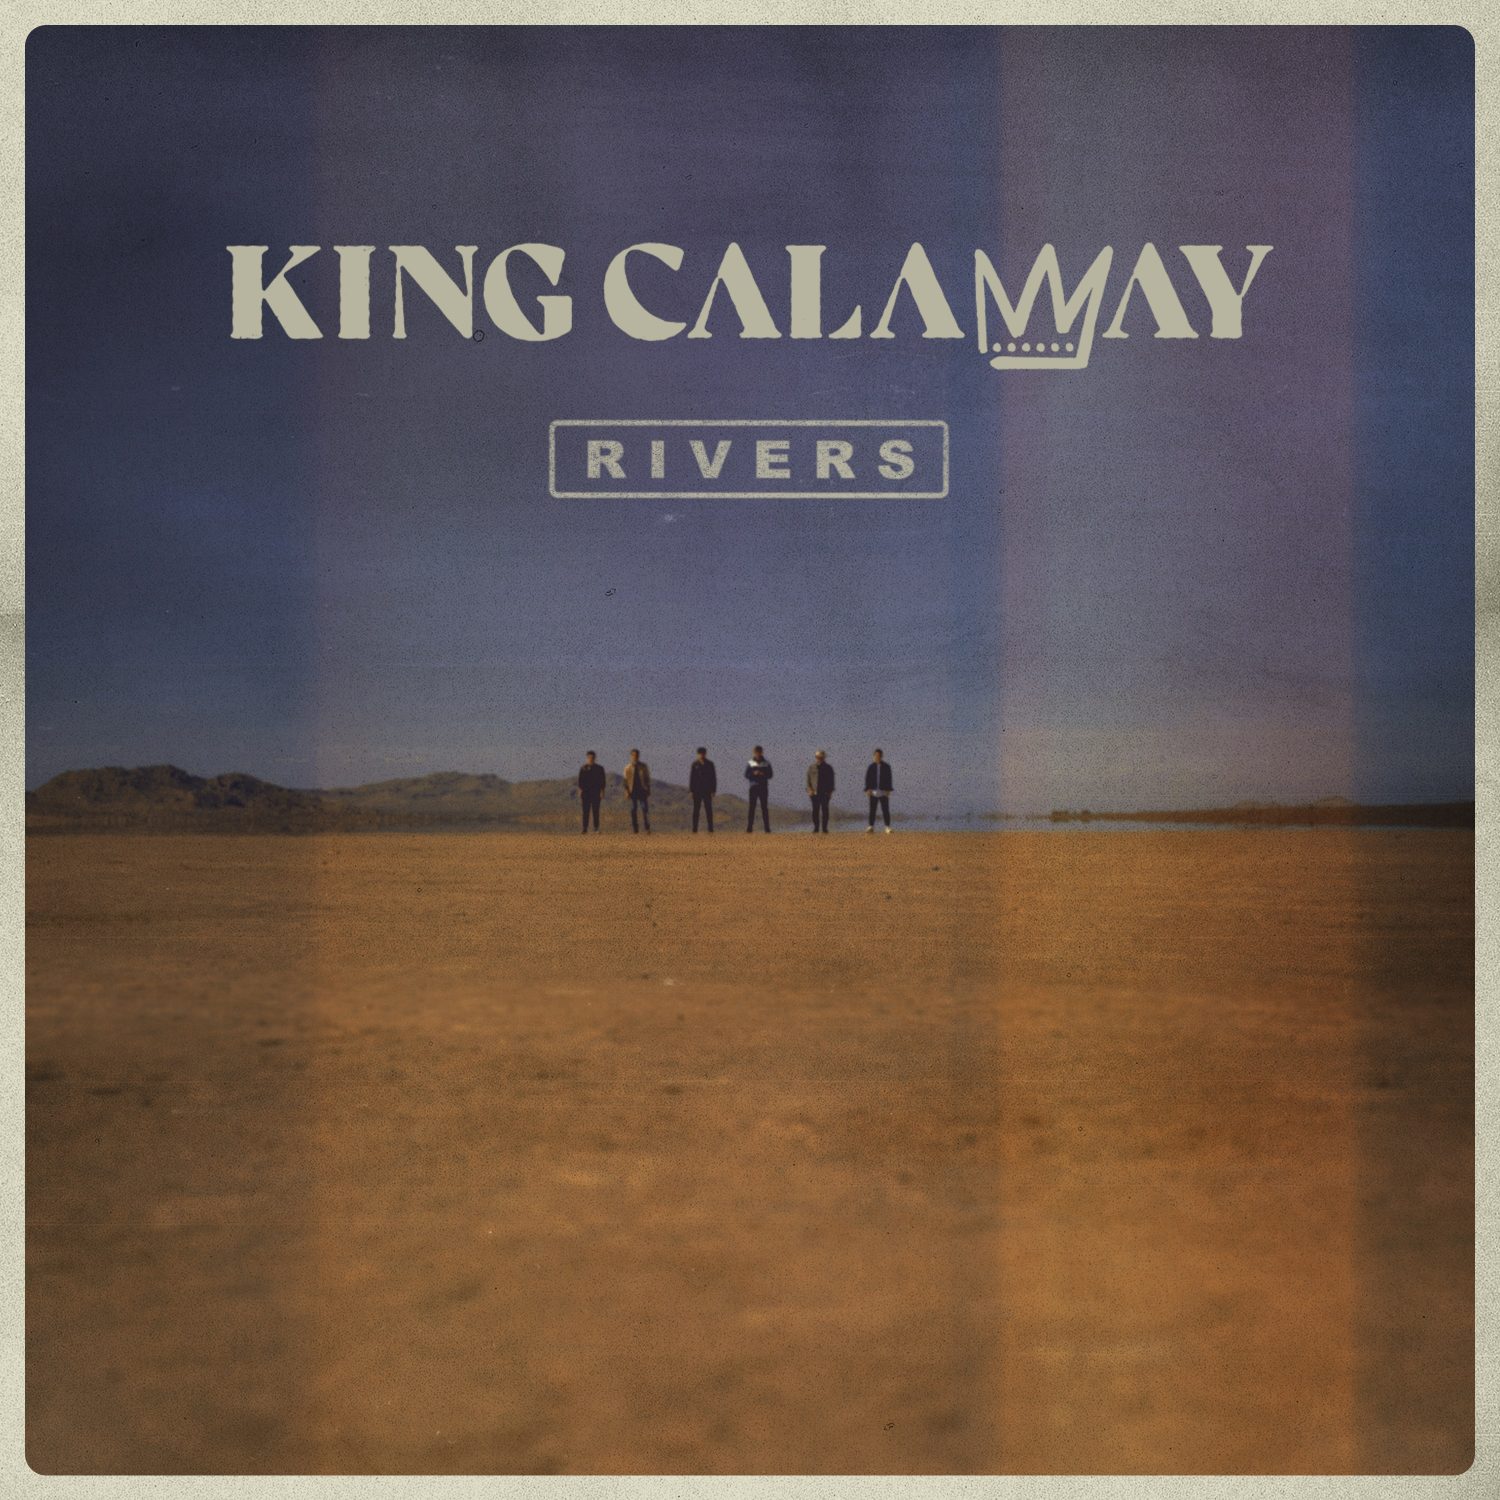 King Calaway Announce Release Date, Track Listing For Debut Album